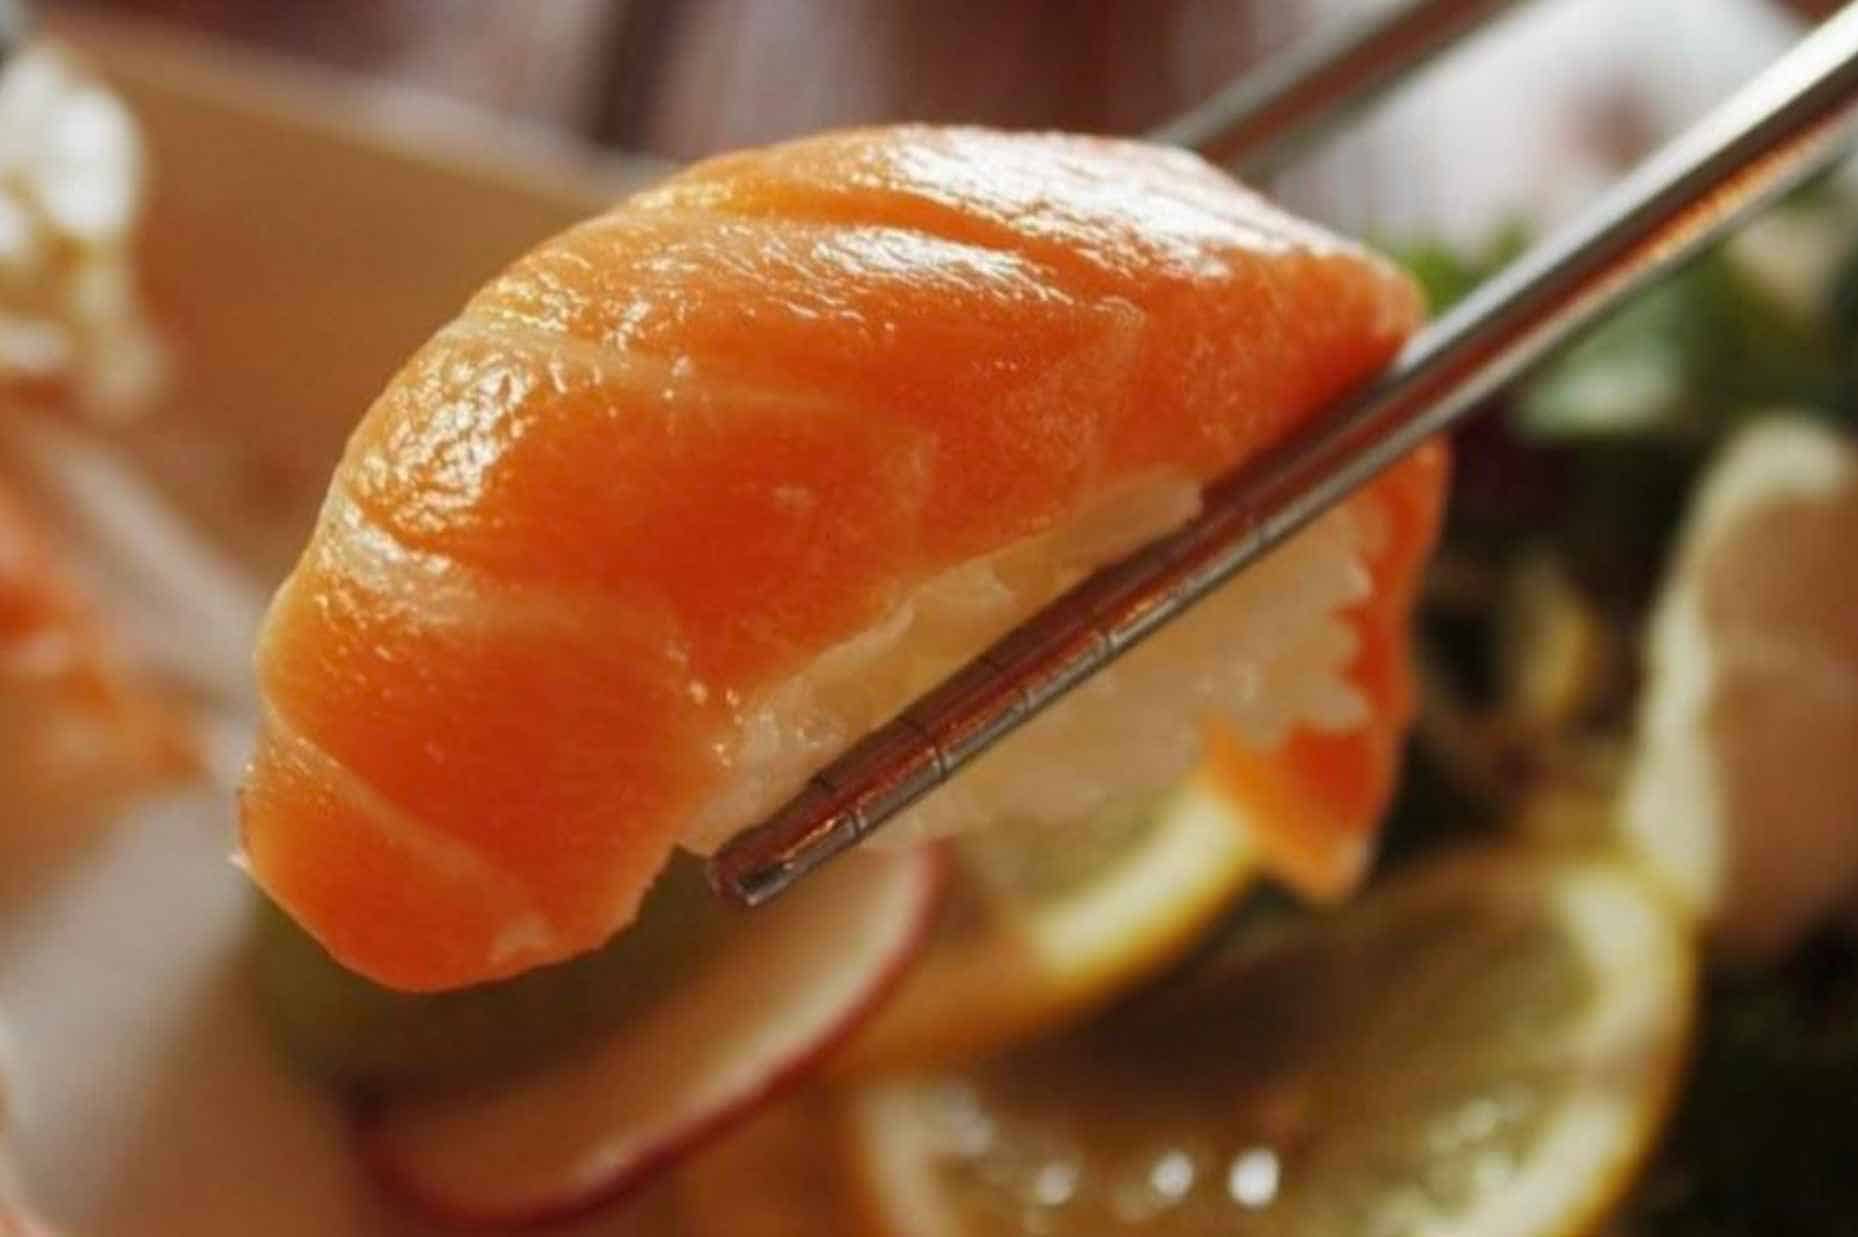 What Are The Risks of Eating Sushi While Breastfeeding